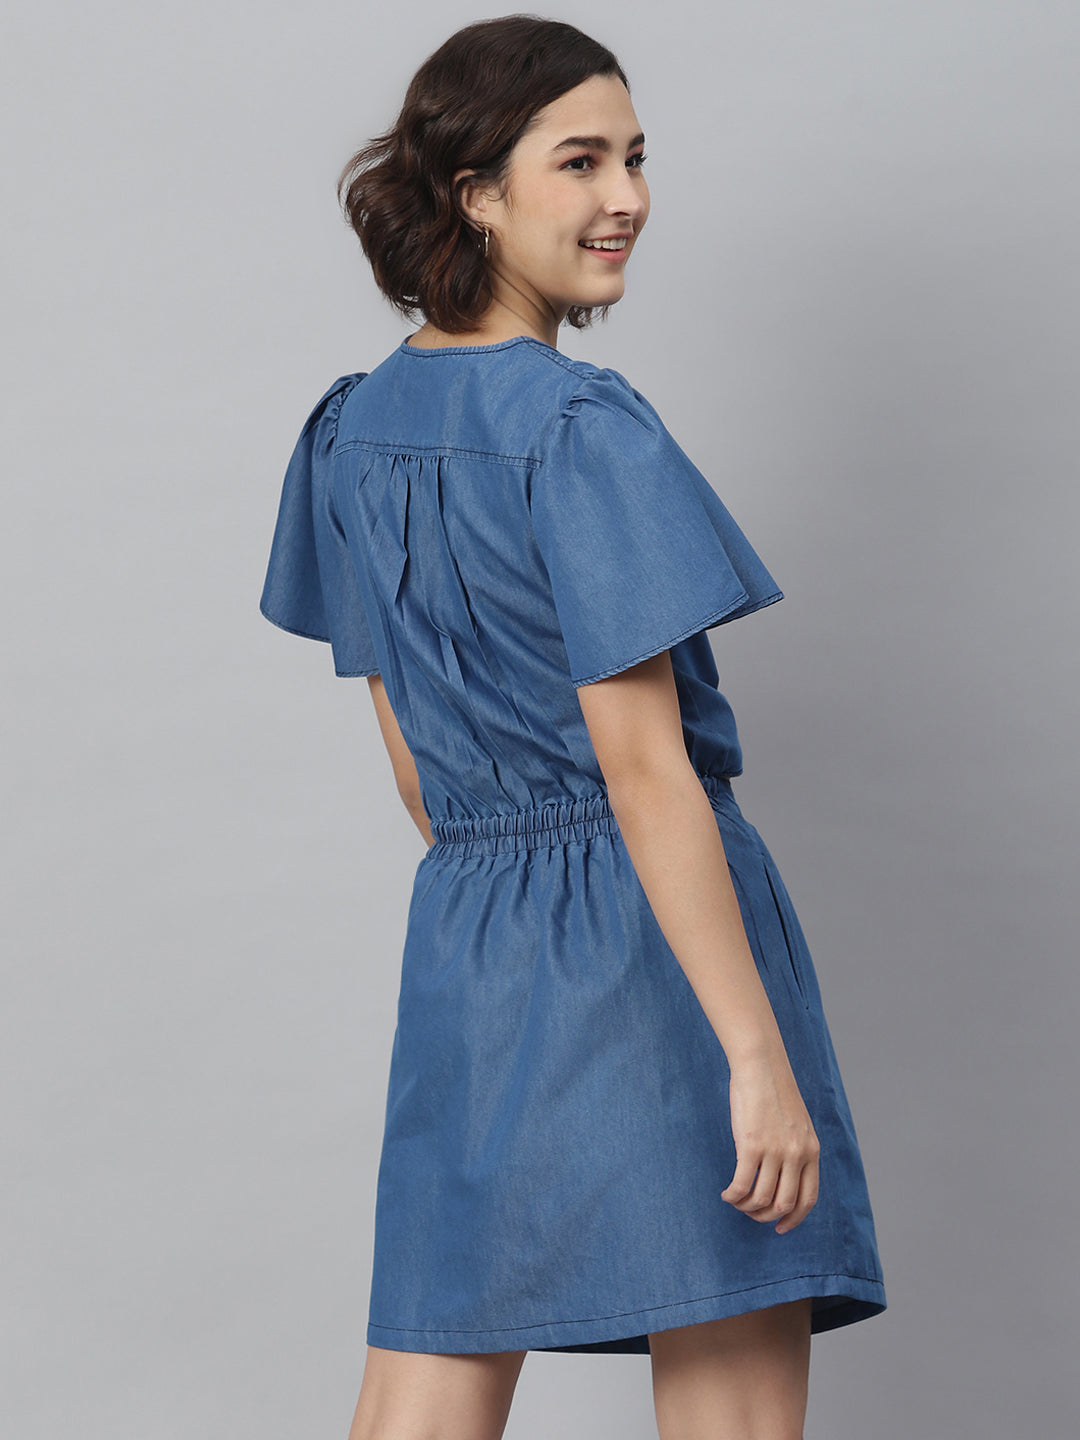 Women's Blue Denim Tie Knot Top and attached Skirt Dress - StyleStone